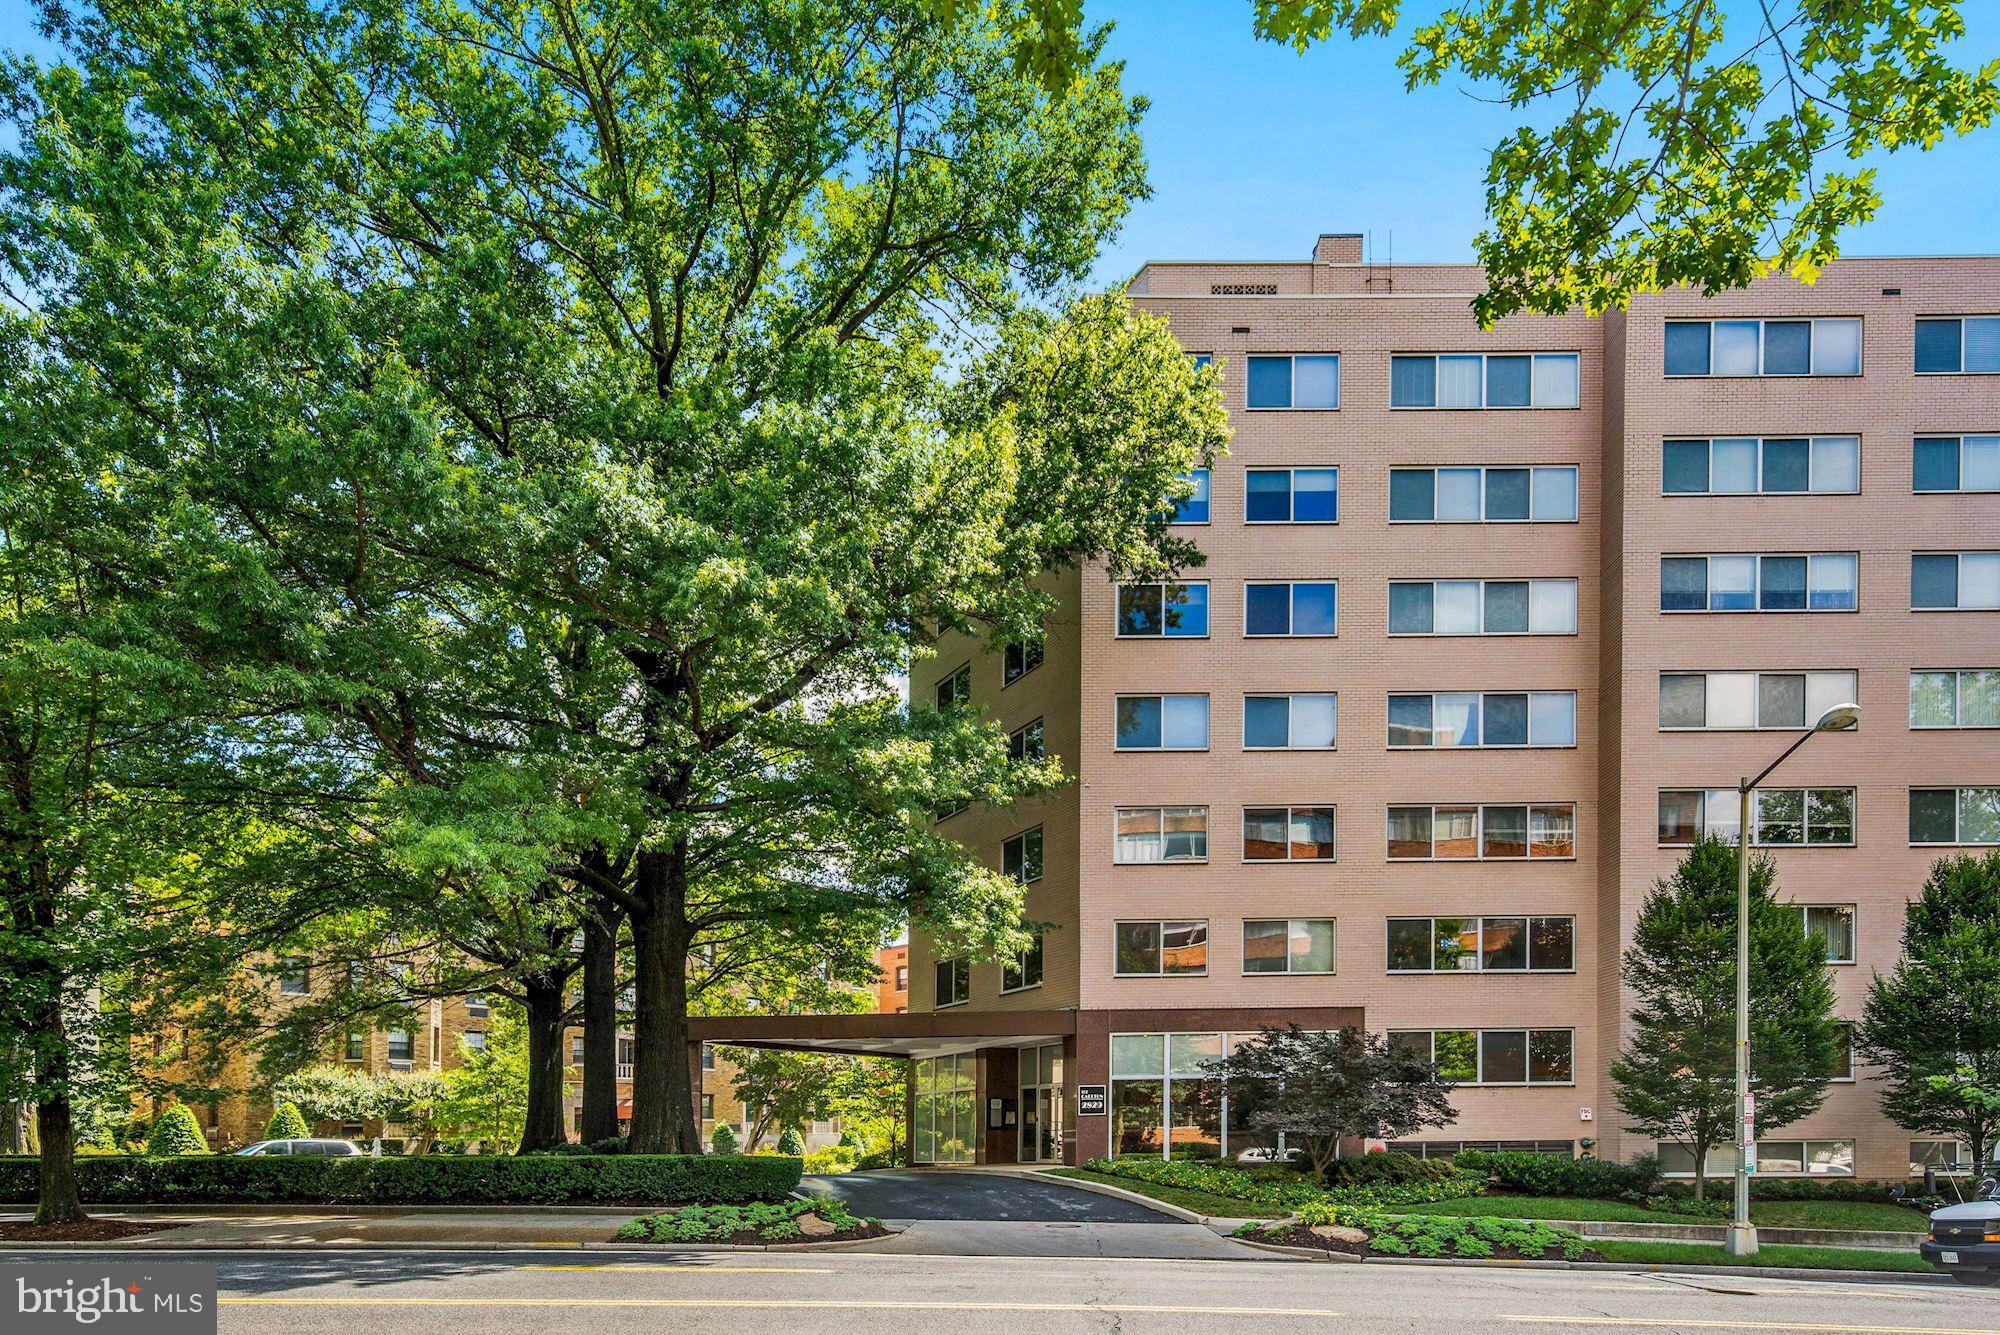 Best Located just a few blocks from Woodley Metro and National Zoo - unit 403 is a roomy upgraded an